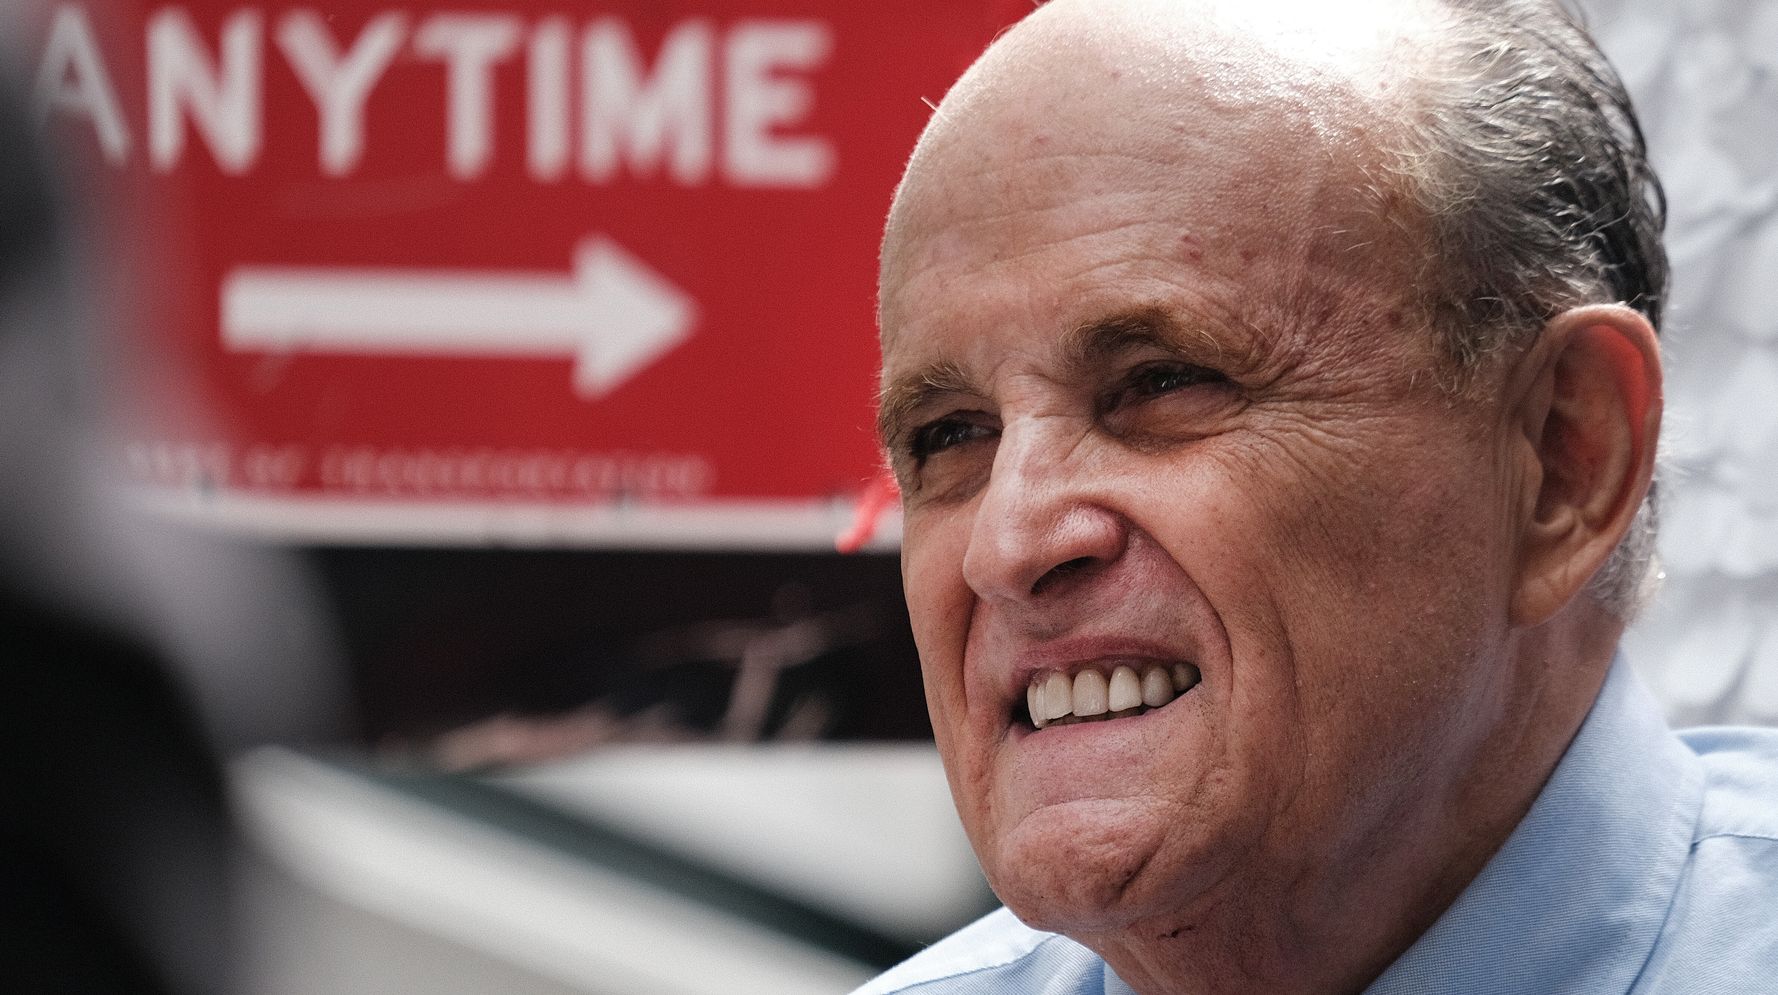 Rudy Giuliani Gets Pranked On Cameo, And It's A Doozy